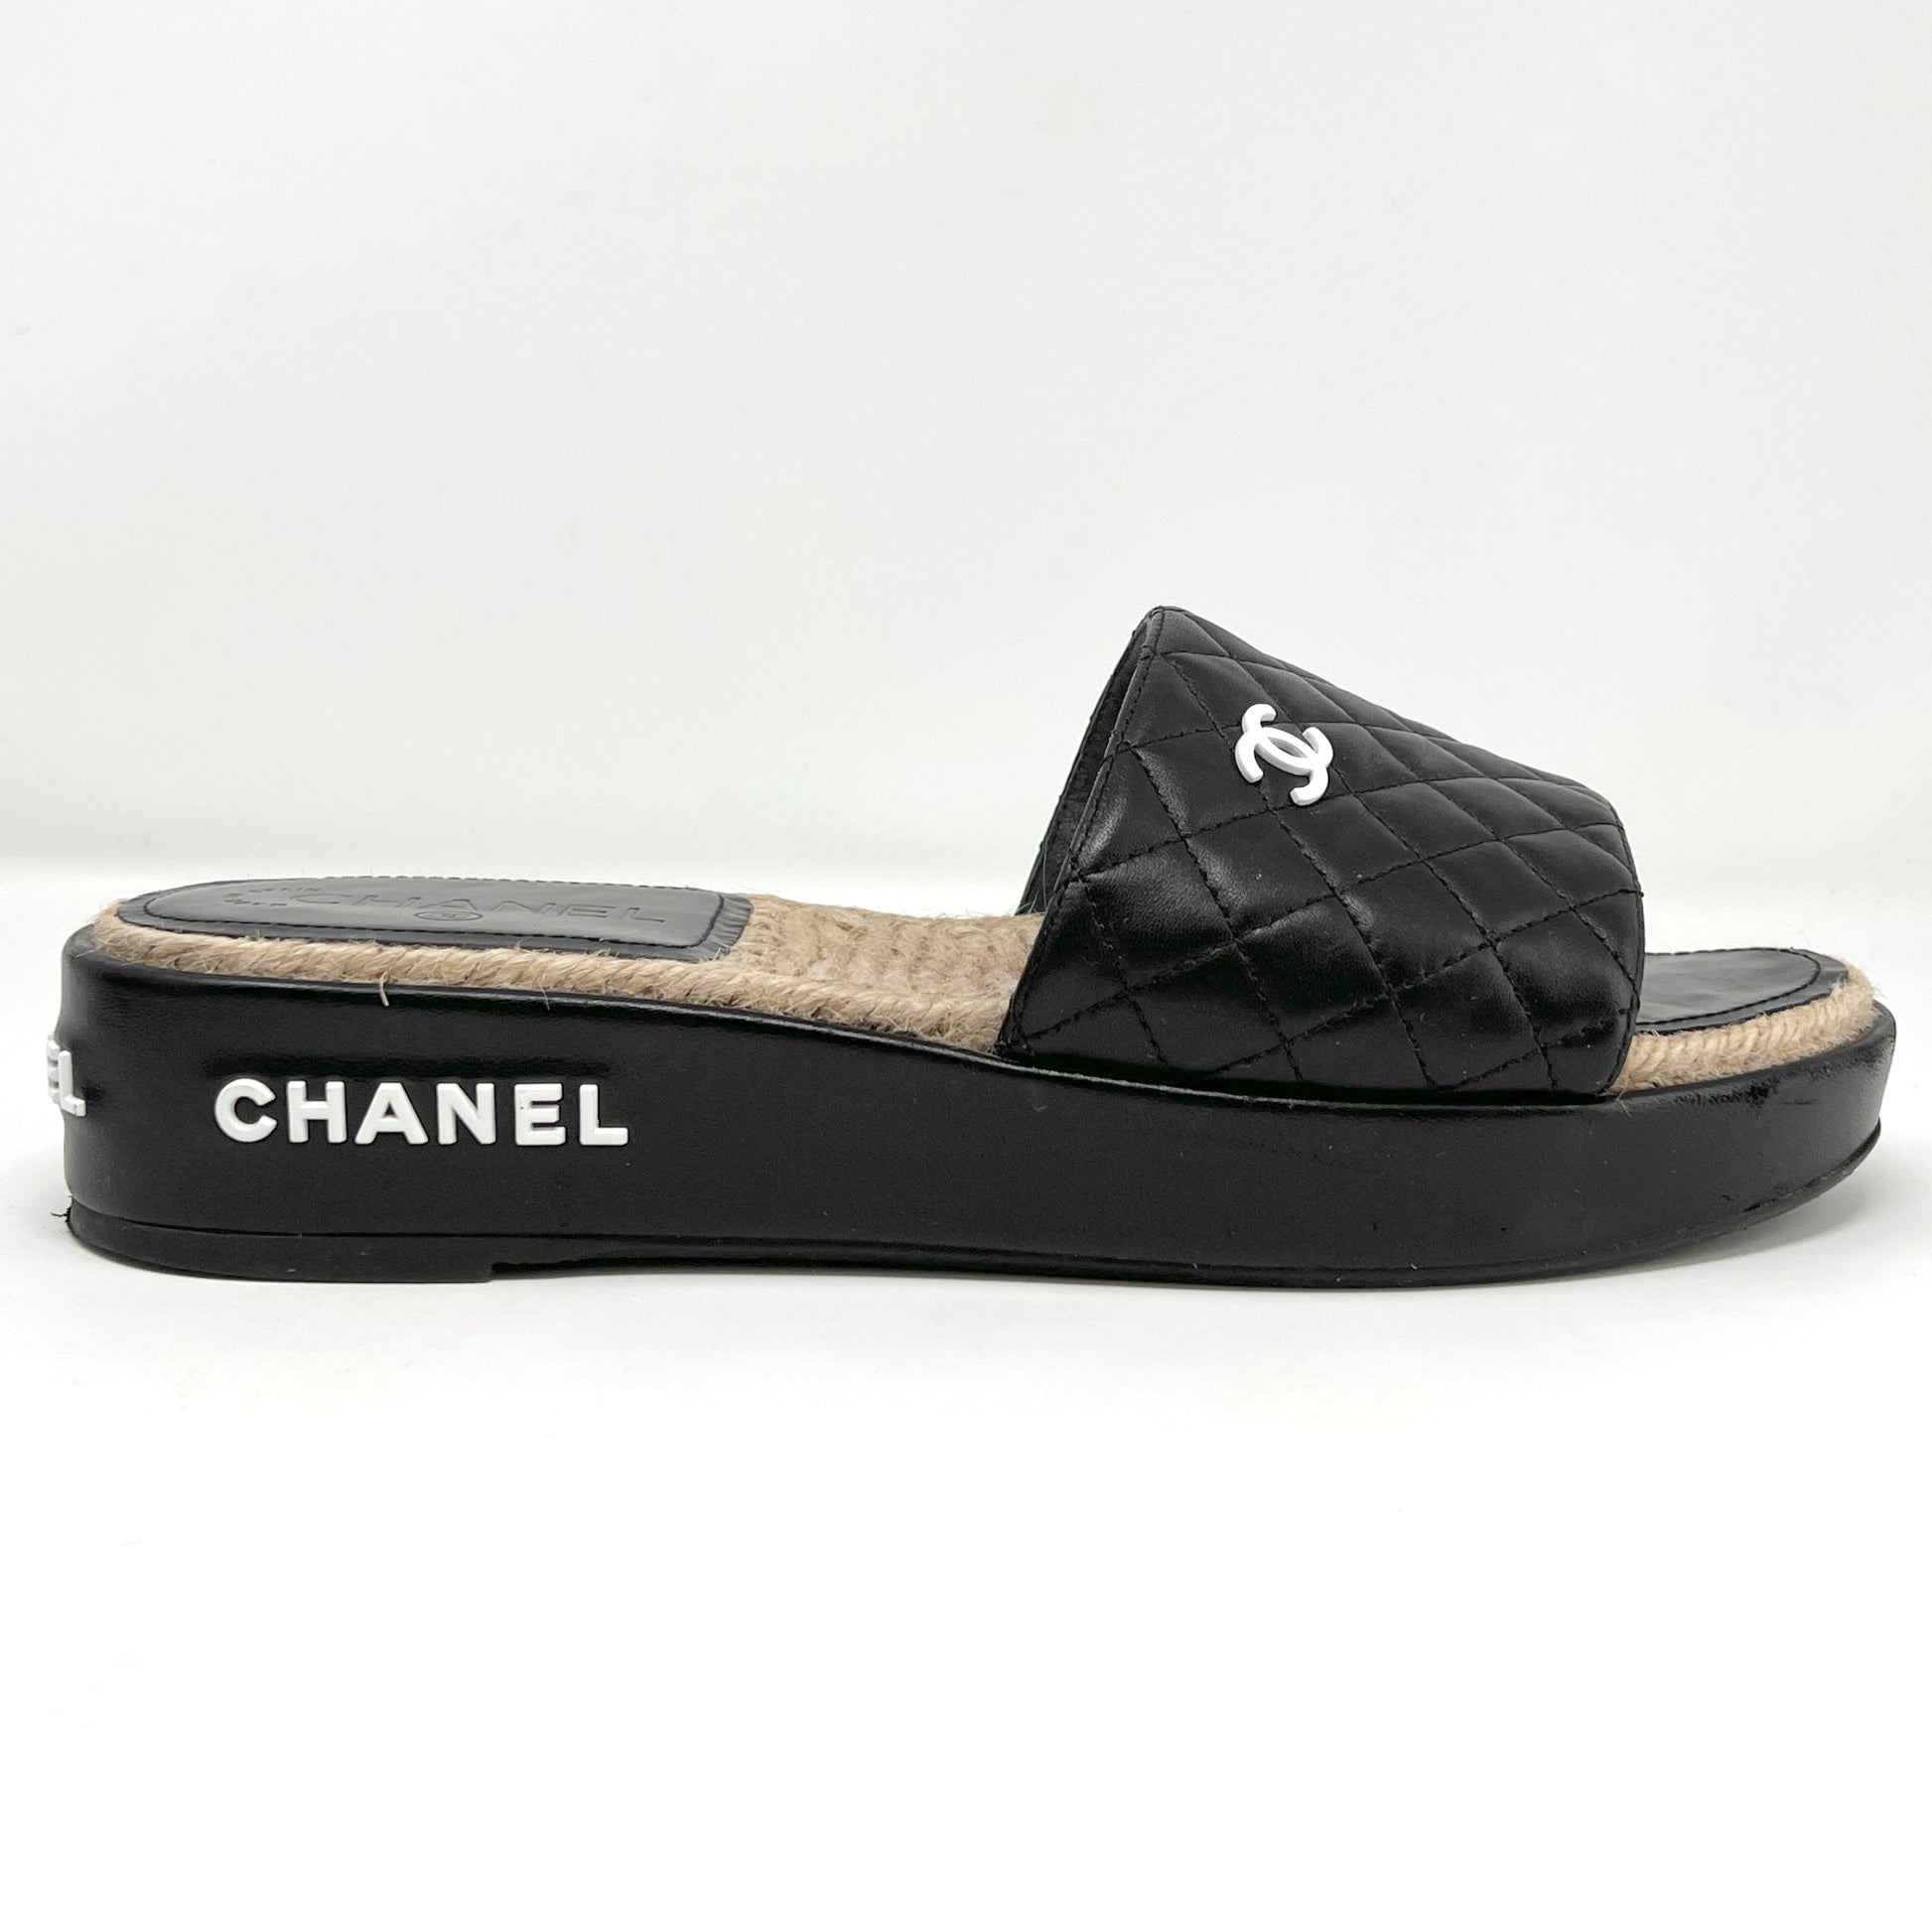 Chanel Black Quilted Leather White Interlocking Logo Espadrilles Sandals Mules